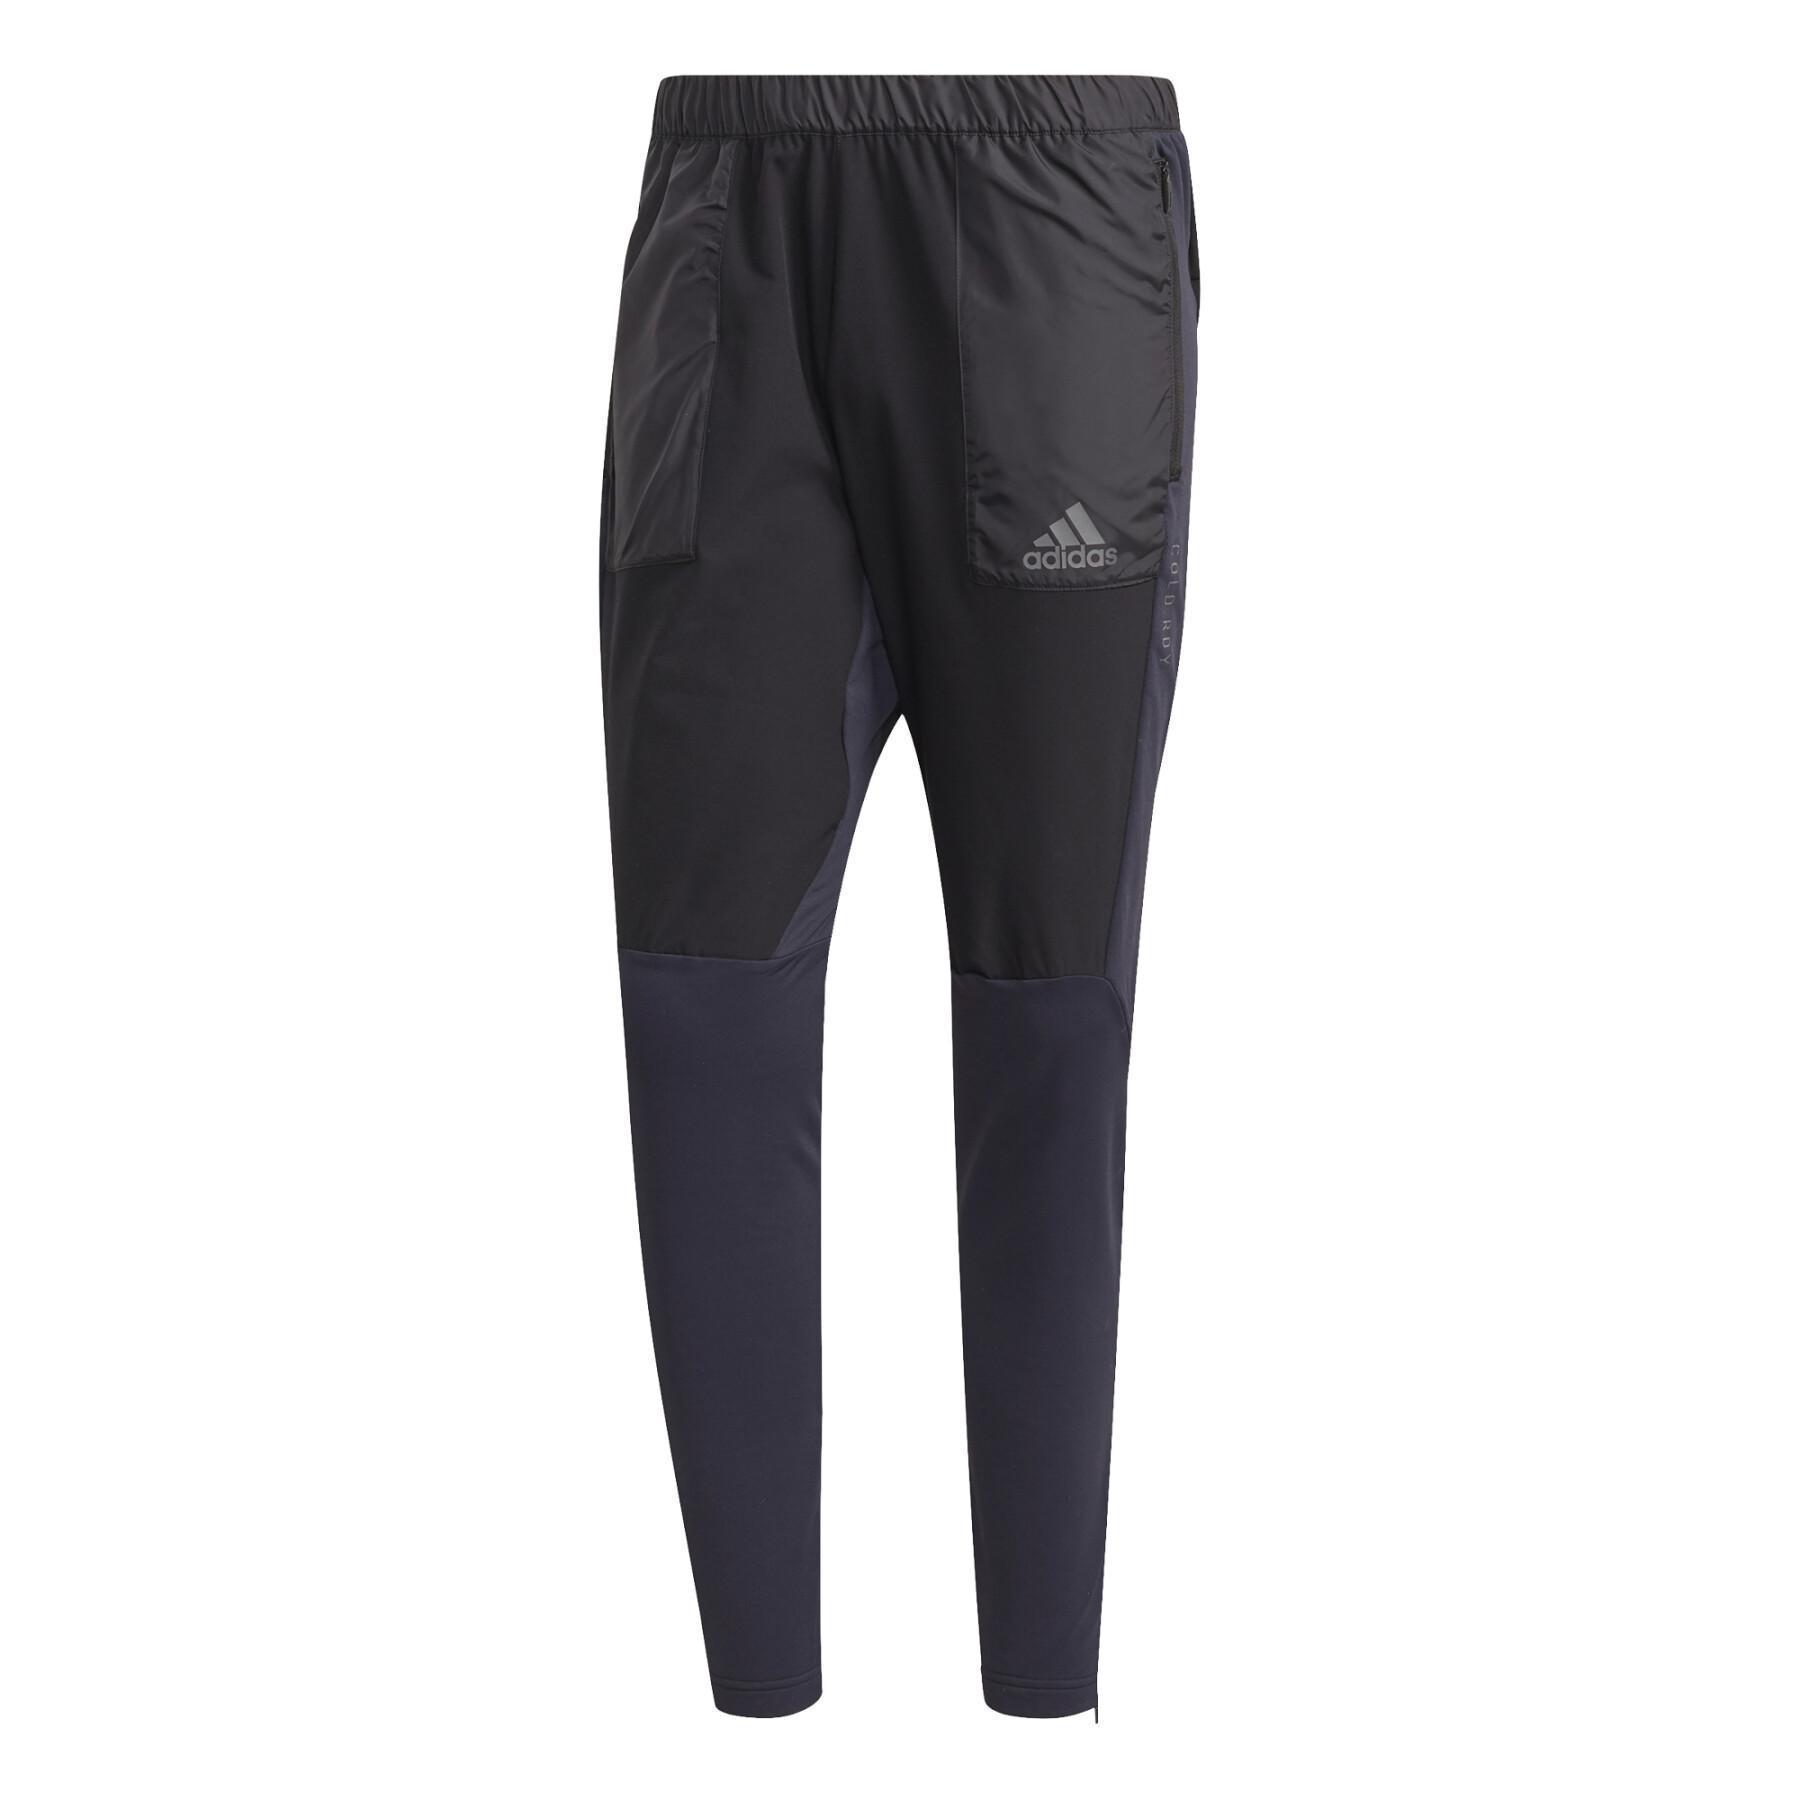 Pants adidas COLD.RDY Running